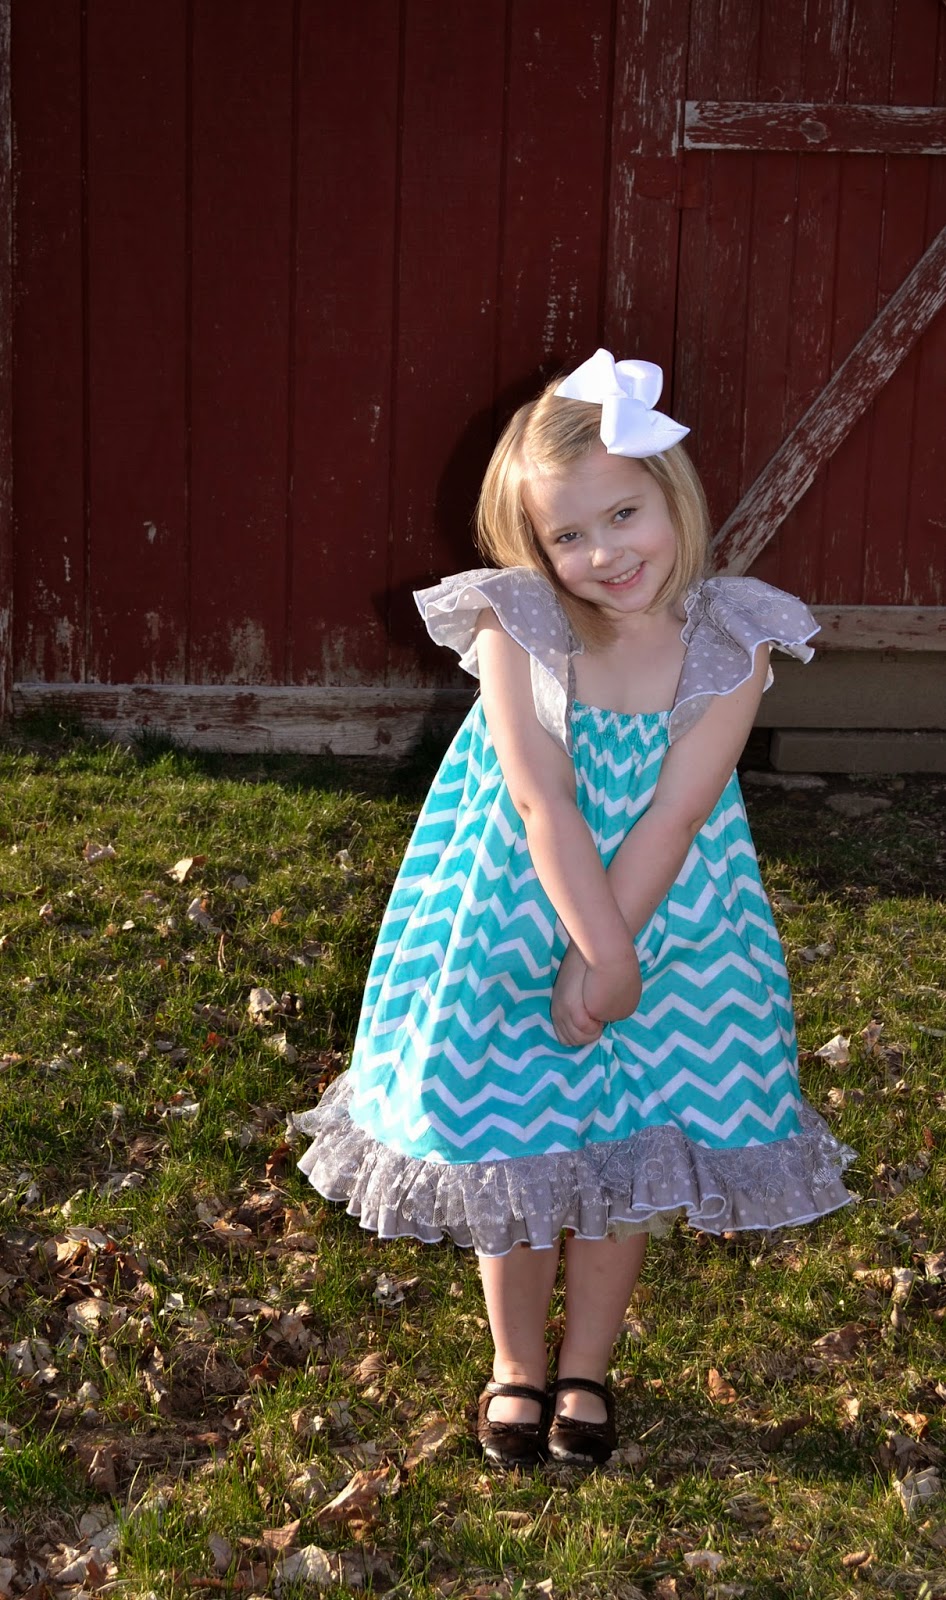 Crafty Biggers: Whimsy Couture Pattern Review - Sweet Baby Doll Dress